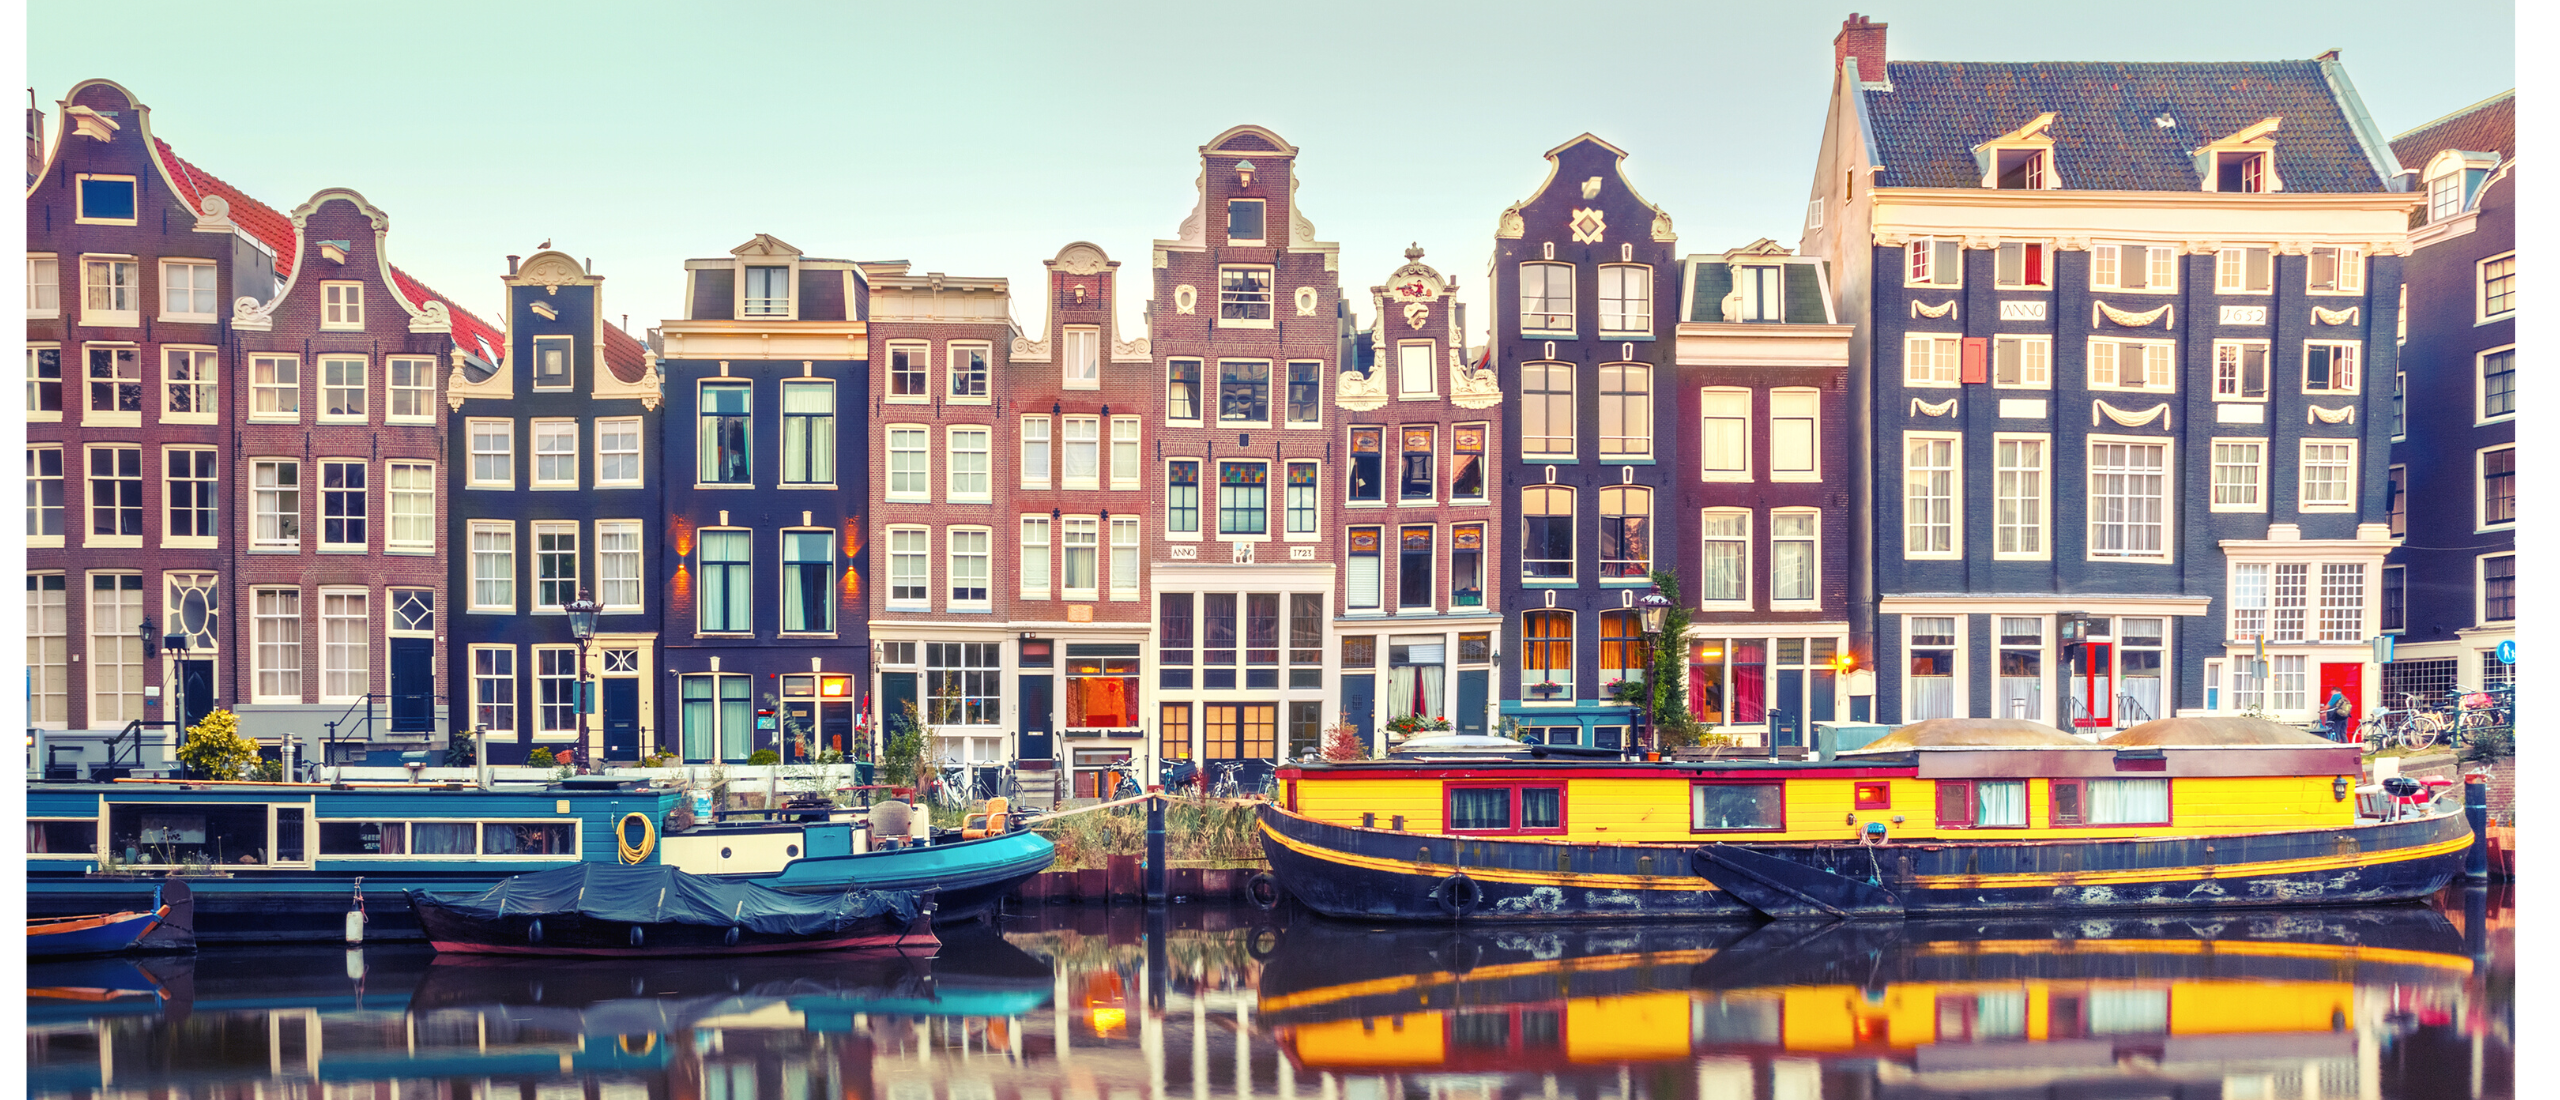 Building Your Social Network in Amsterdam: A Guide for Expats